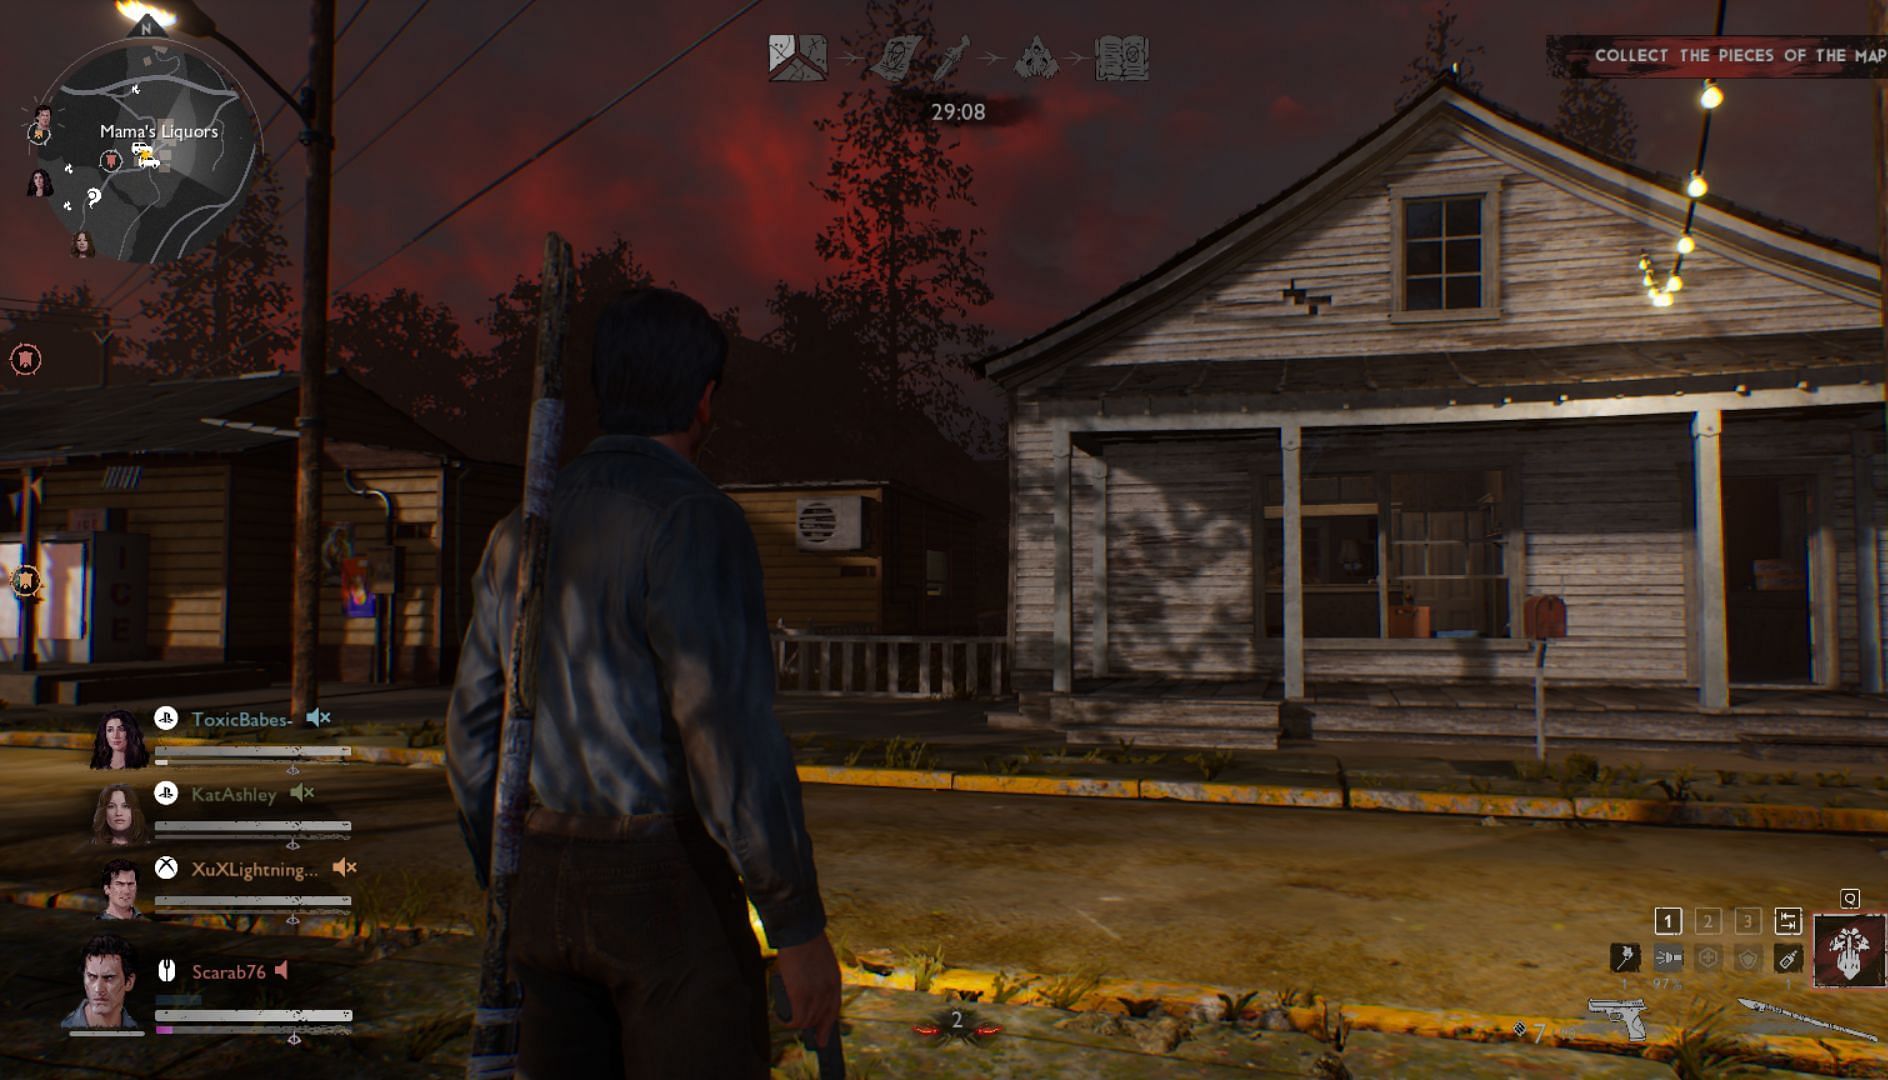 A display of one of the potential environments players may encounter in Evil Dead: The Game (Image via Saber Interactive)